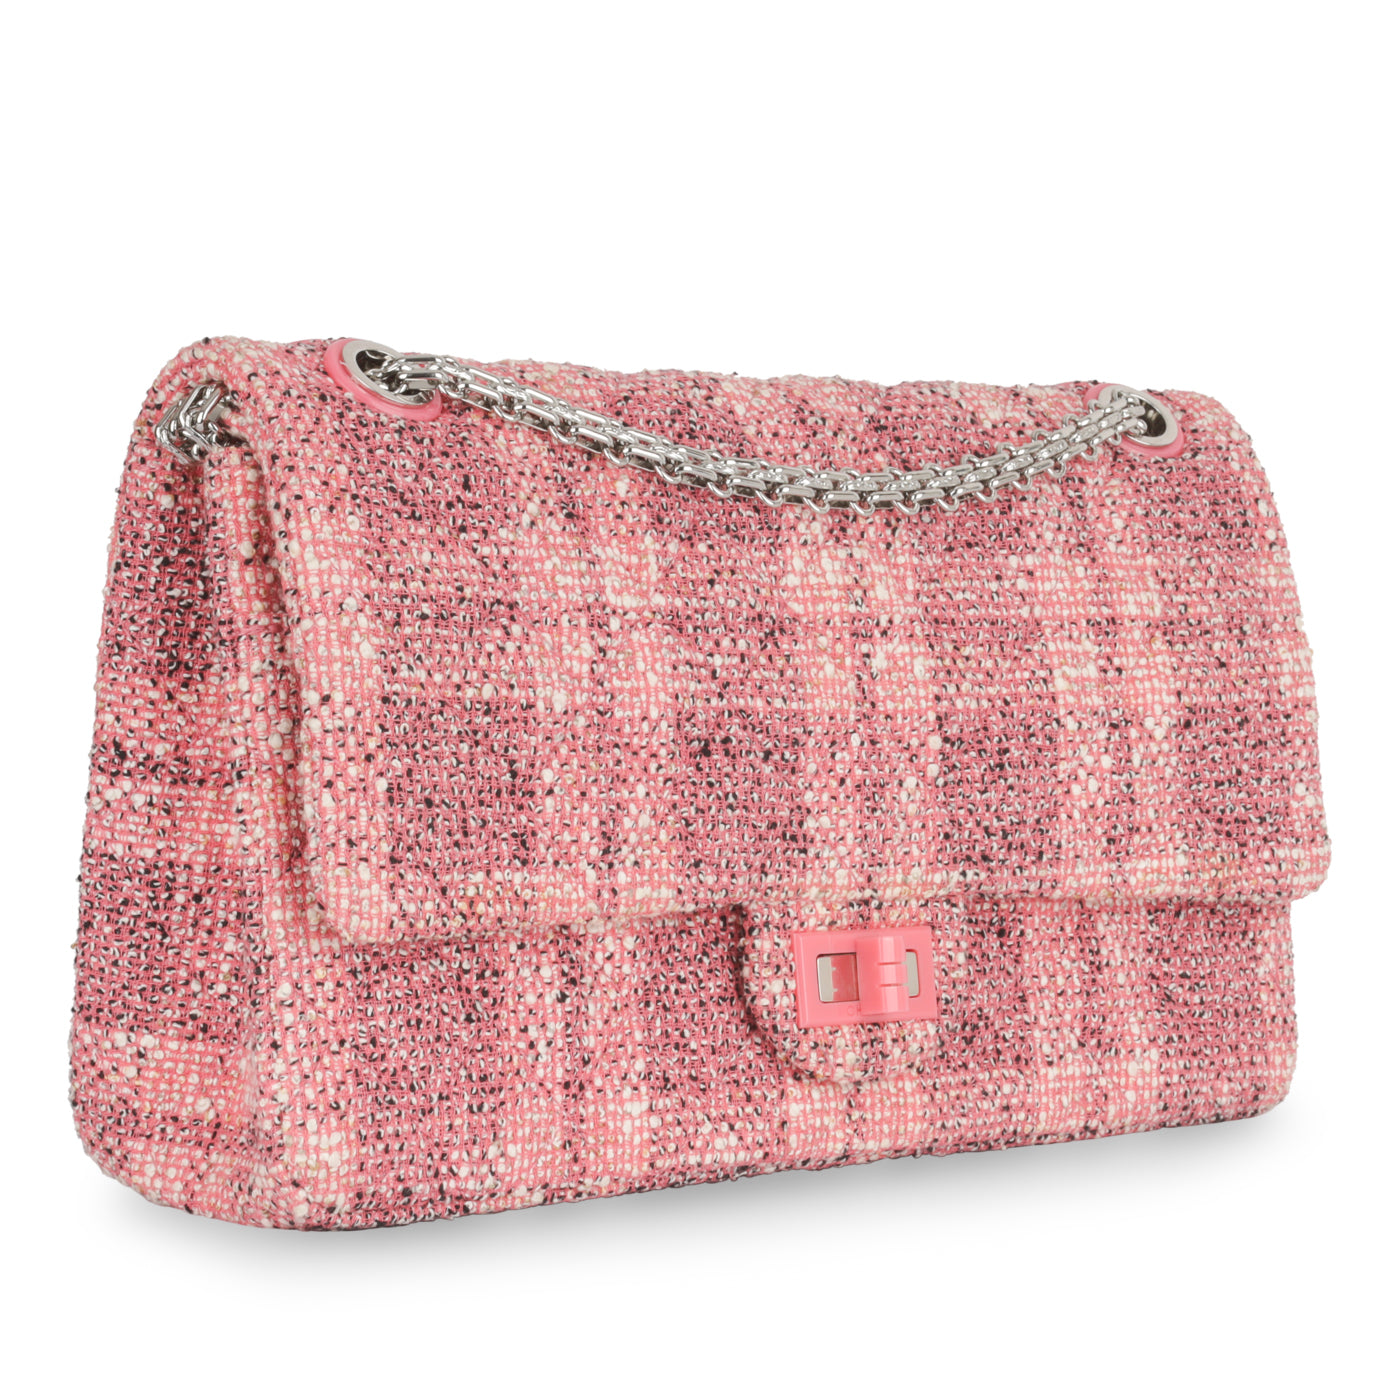 Chanel - 2.55 Re-issue Flap Bag - 226 - Pink Tweed - SHW